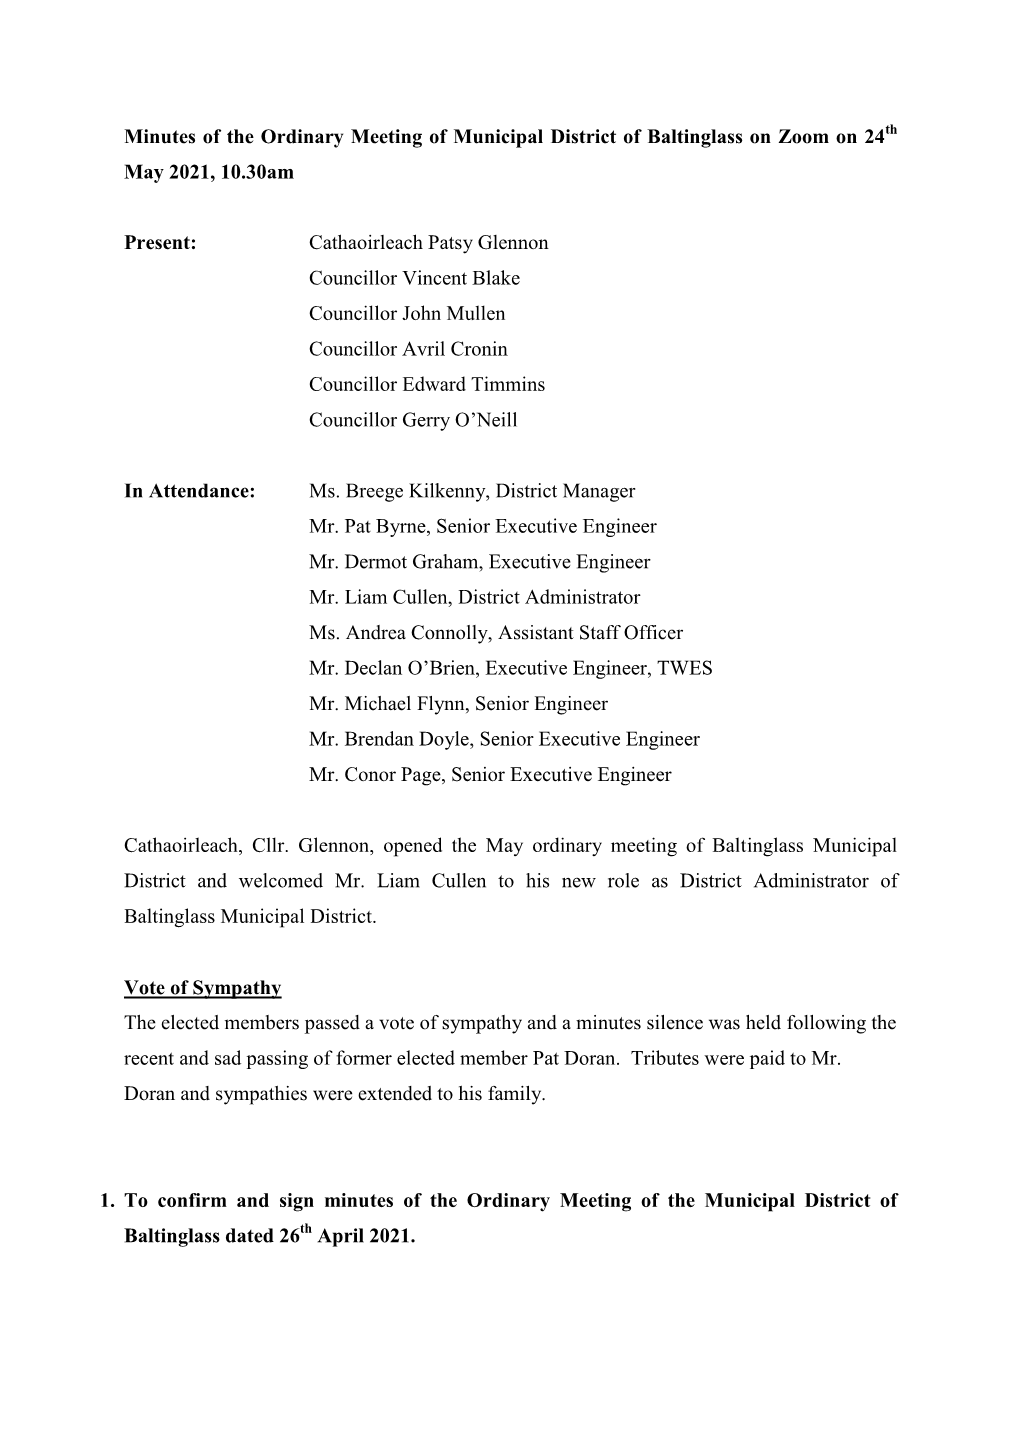 Minutes of the Ordinary Meeting of Municipal District of Baltinglass on Zoom on 24Th May 2021, 10.30Am